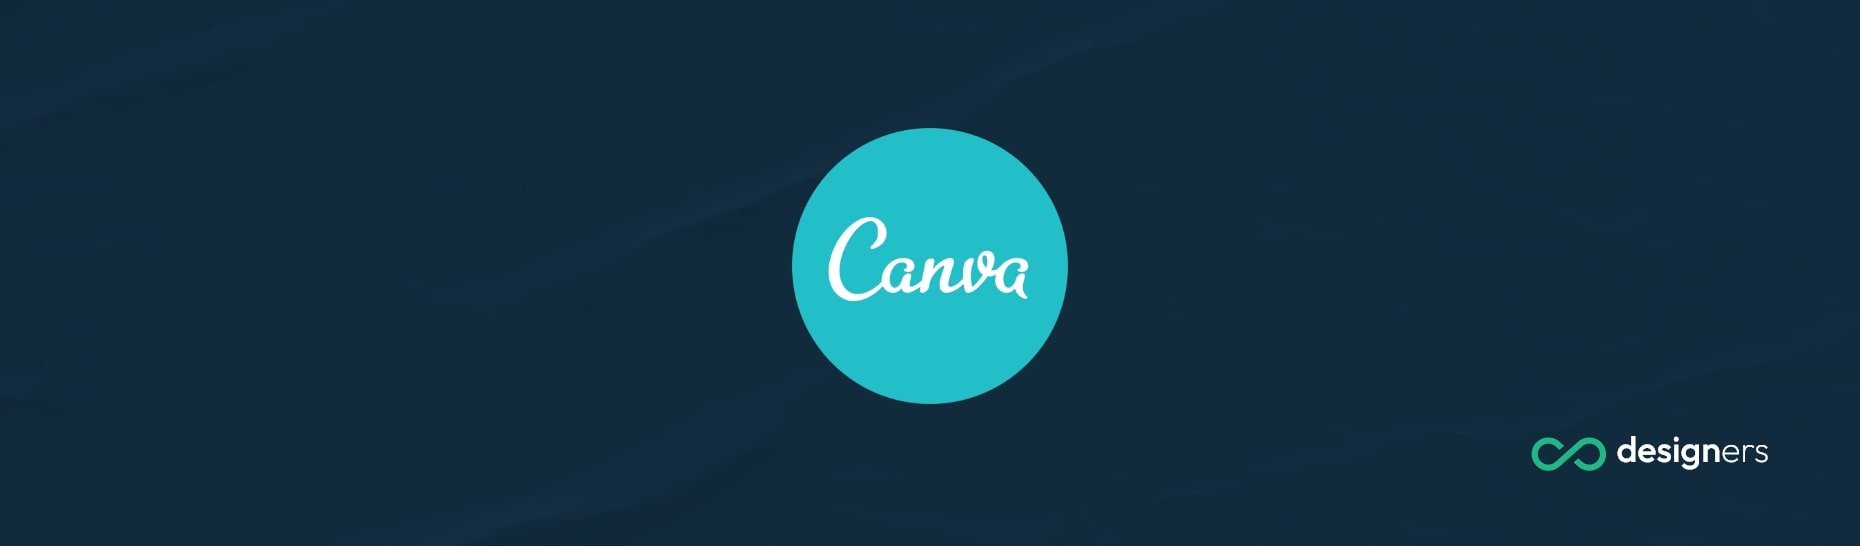 Why Does Canva Glitch So Much?